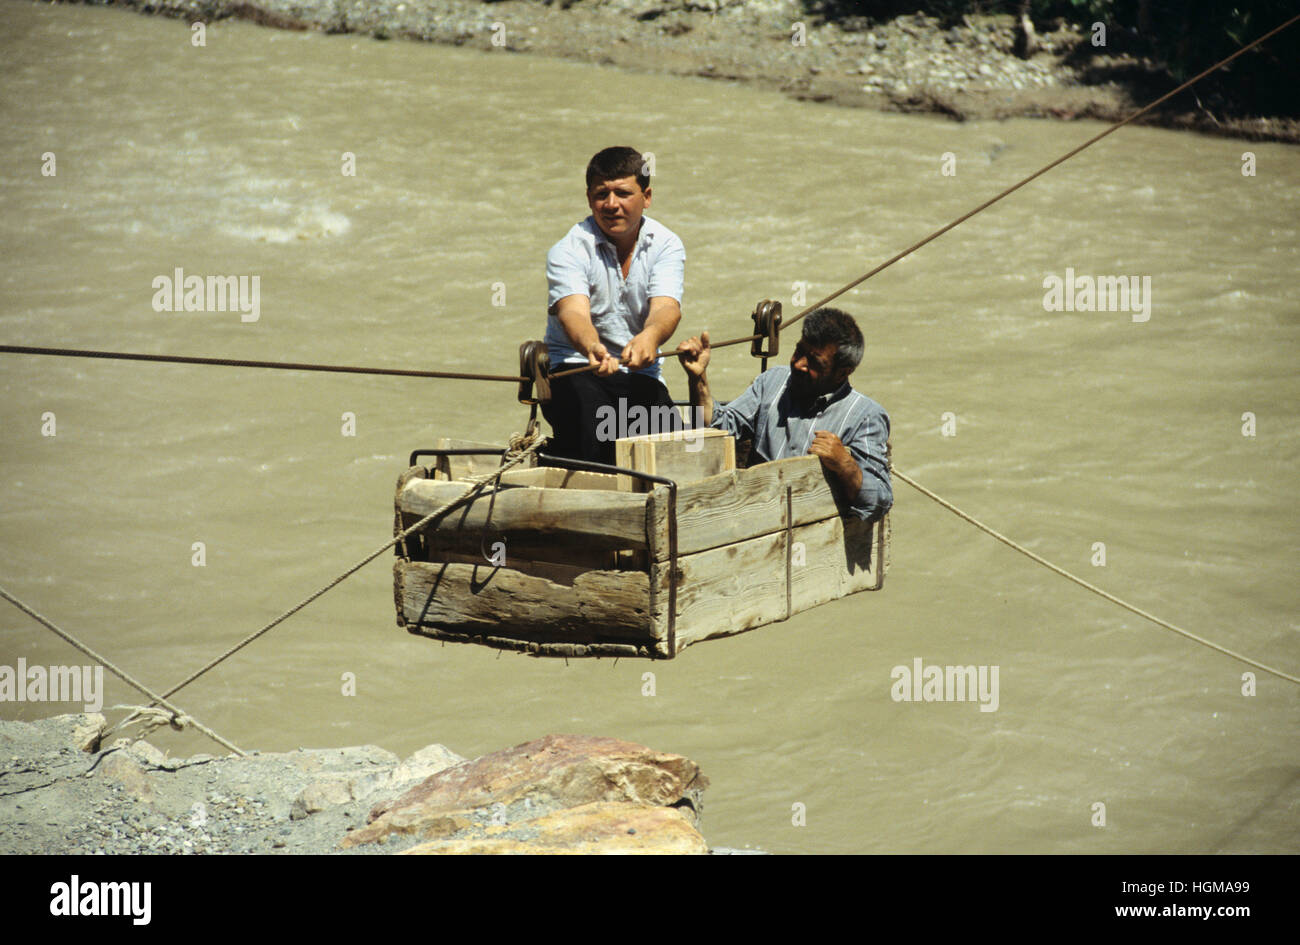 Two Turkih Men in a Zip-line Trolley, aka Zip-wire, Rope or Cable Trolley (and in Turkish as 'Halat'), Crossing the Oltu River, a Tributary of the Coruh River, in north-east Turkey Stock Photo